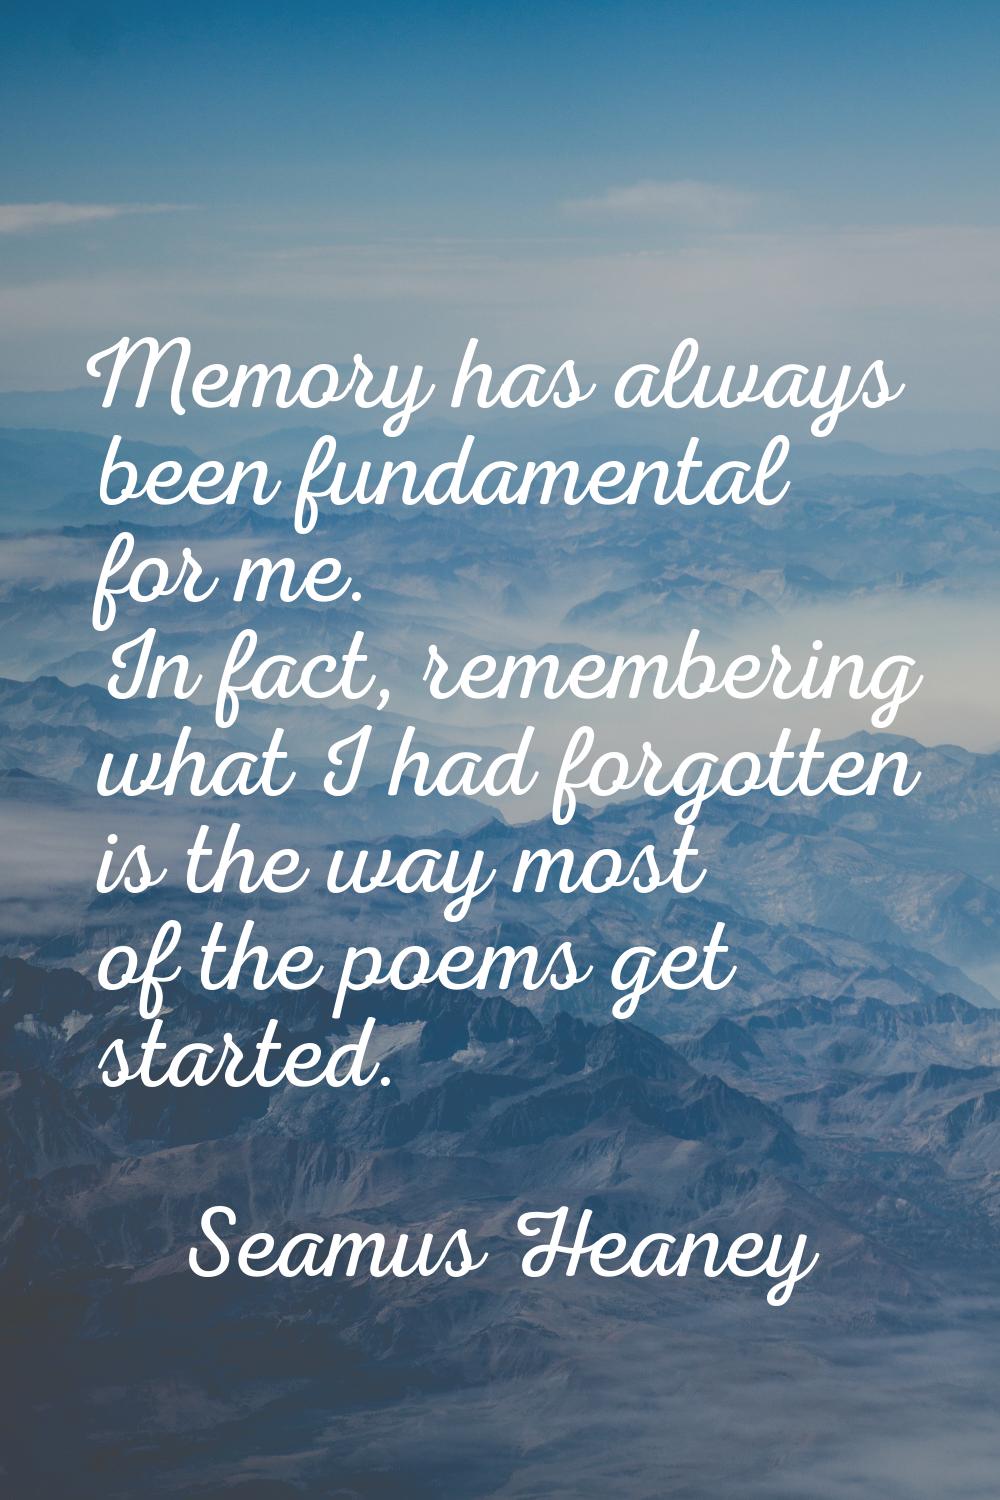 Memory has always been fundamental for me. In fact, remembering what I had forgotten is the way mos